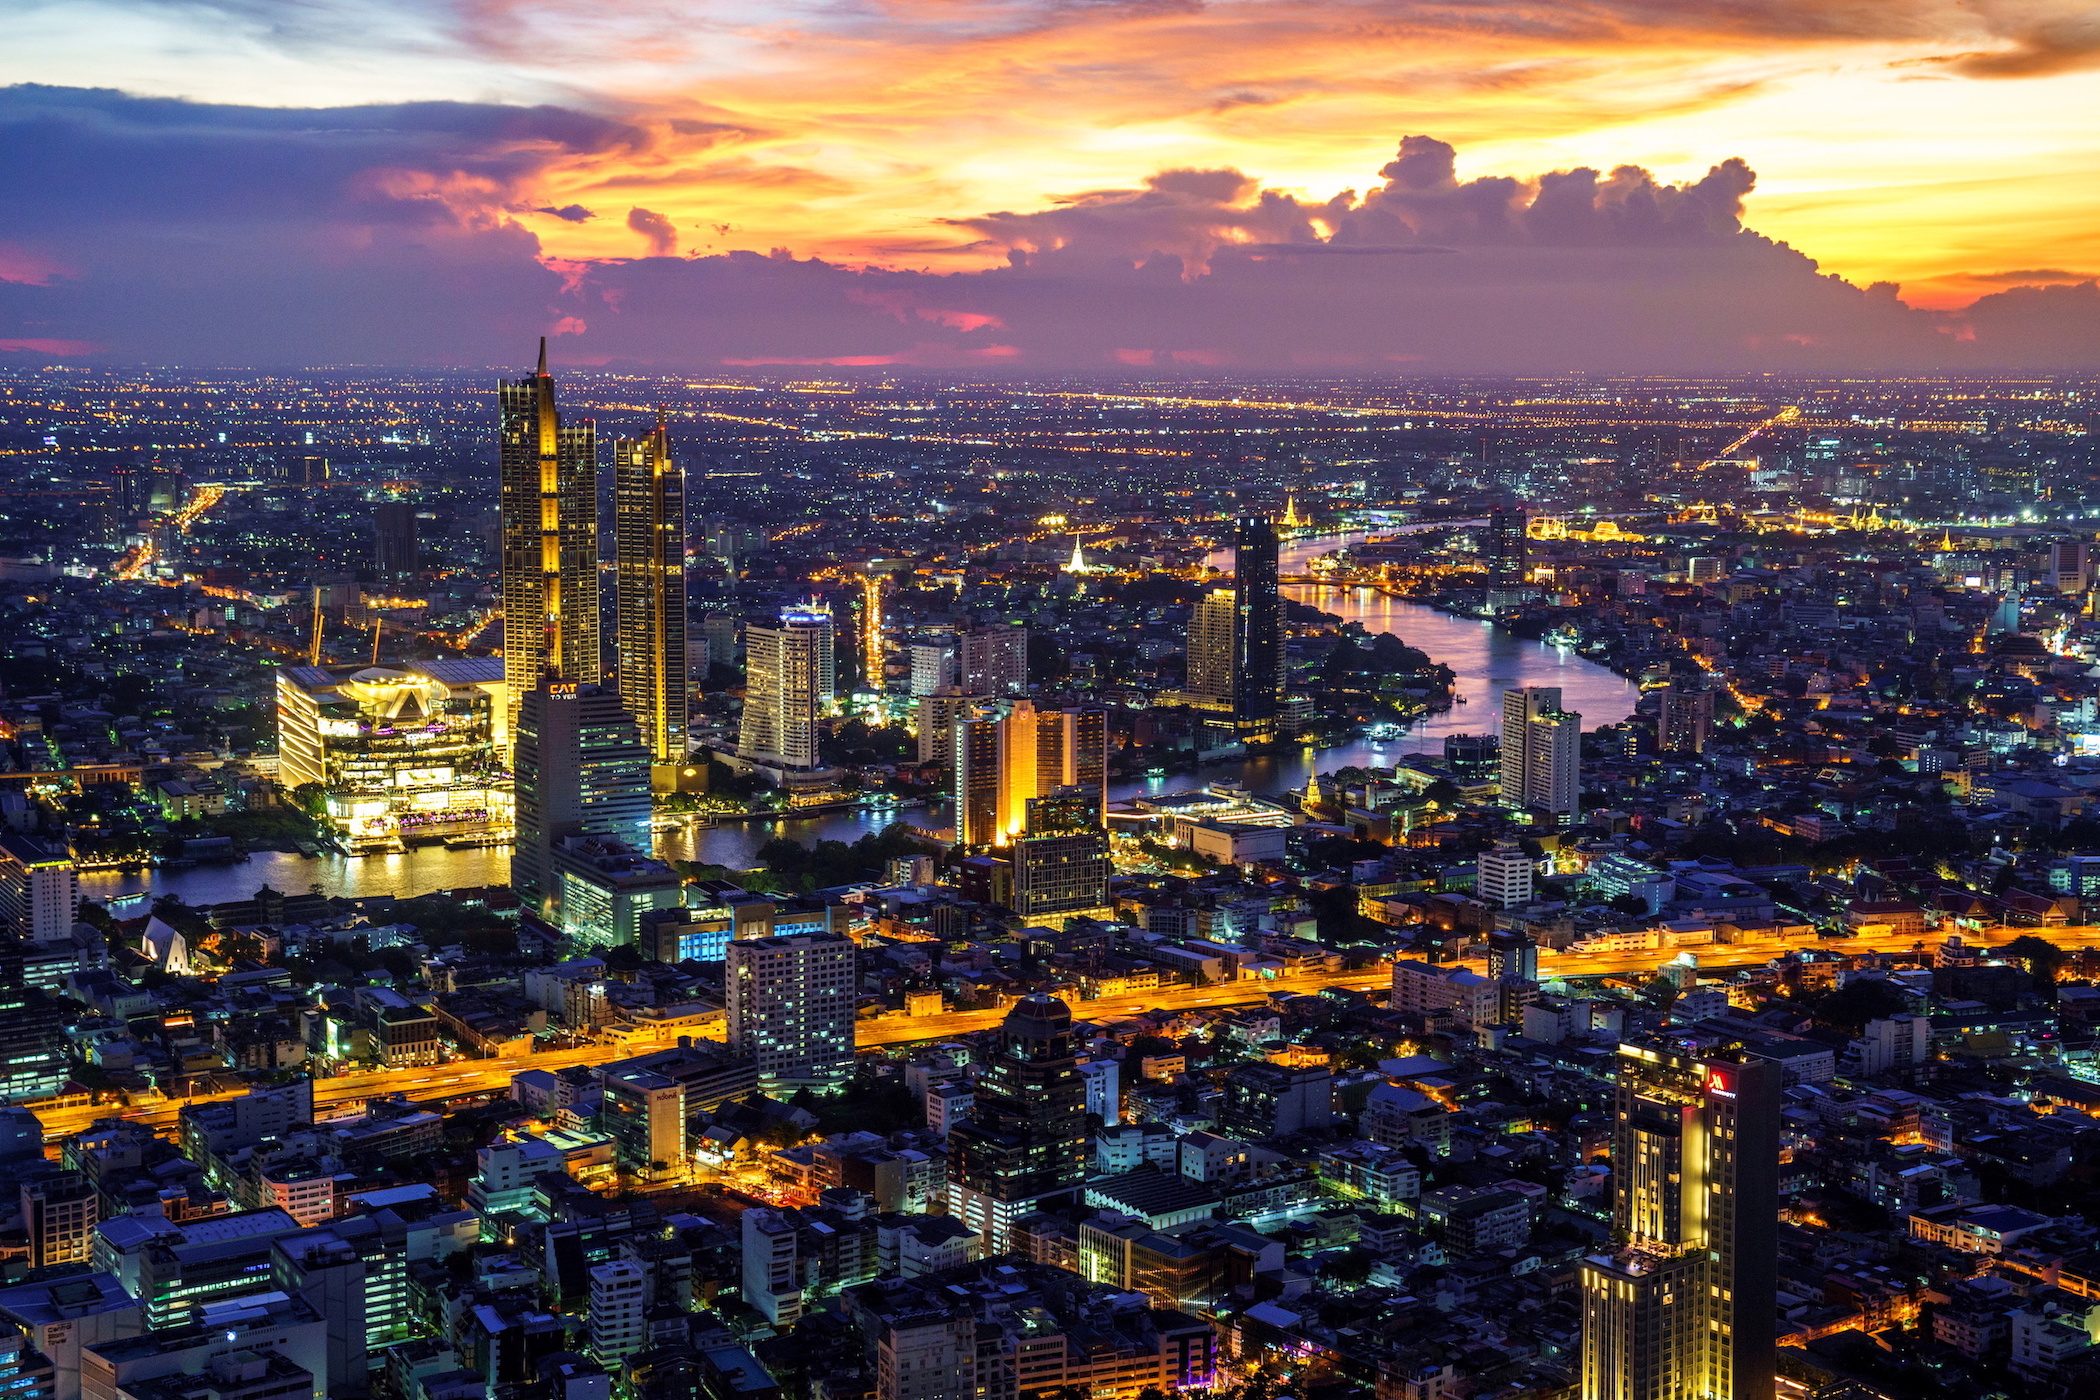 Thailand targets reopening within 120 days as economy flounders